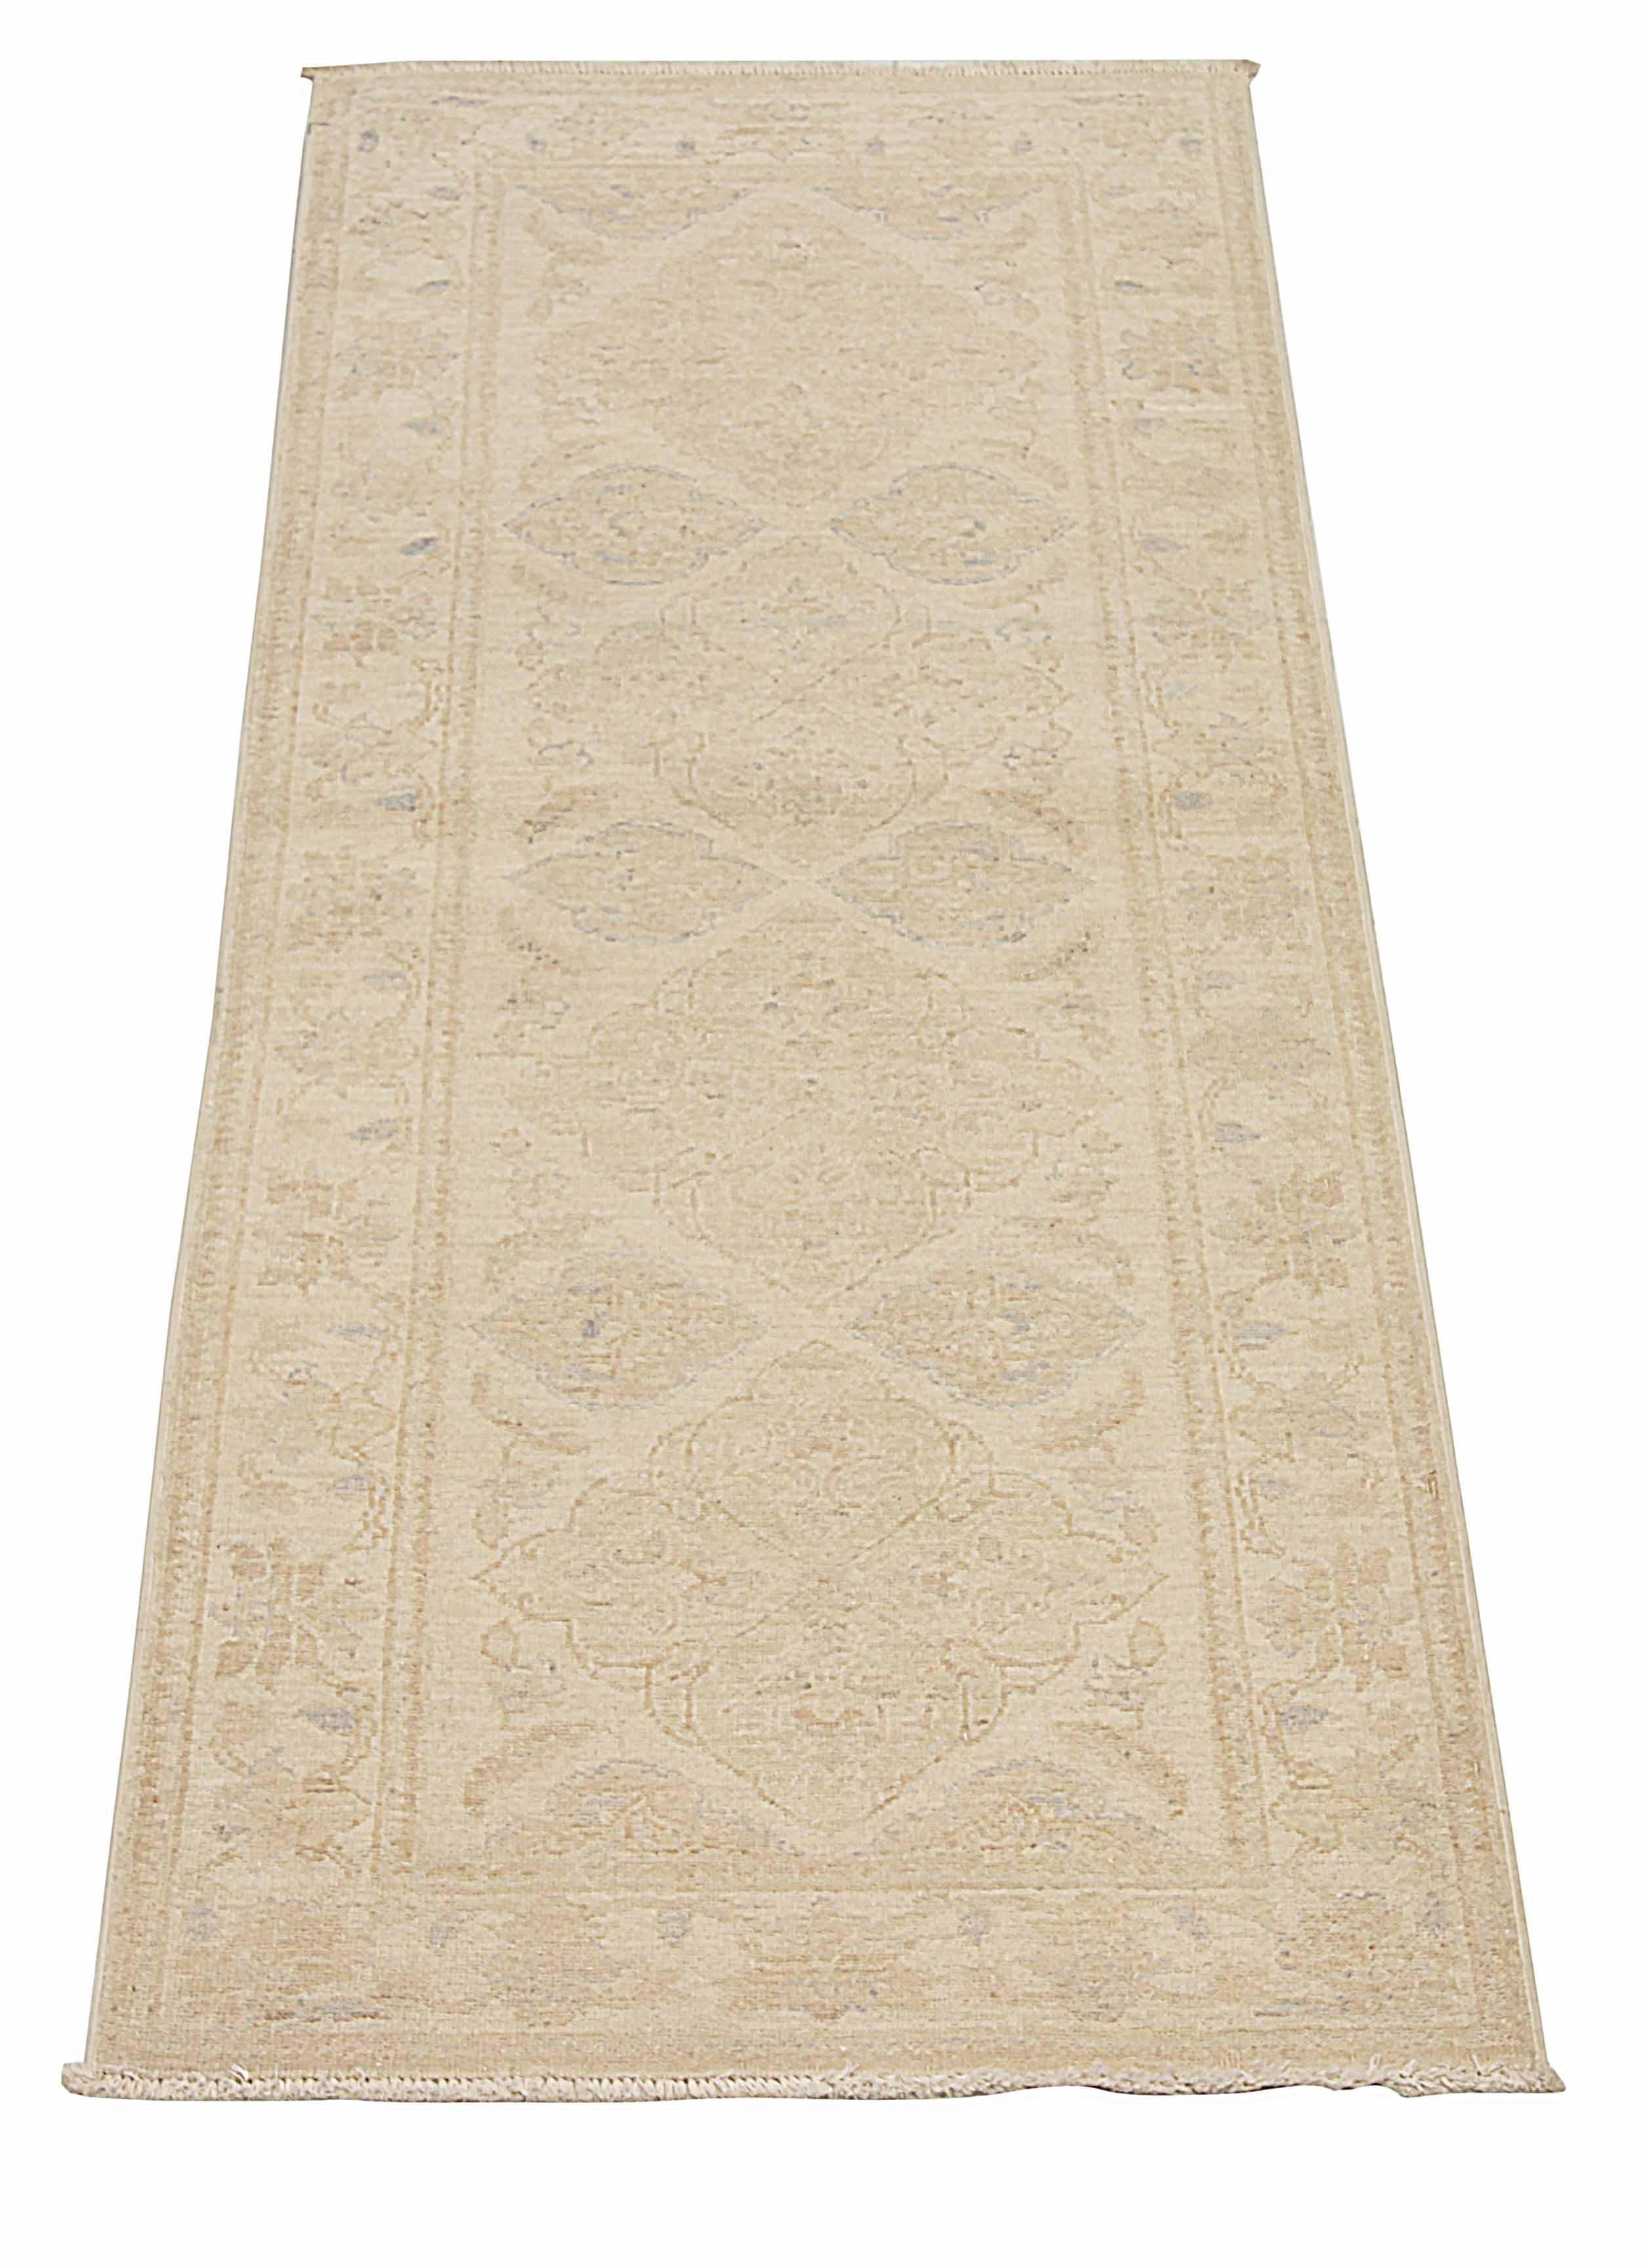 Bring traditional charm and beauty to your home with this handwoven area rug crafted from premium sheep's wool. Colored with all-natural vegetable dyes, this rug is not only stunning but also eco-friendly and safe for both humans and